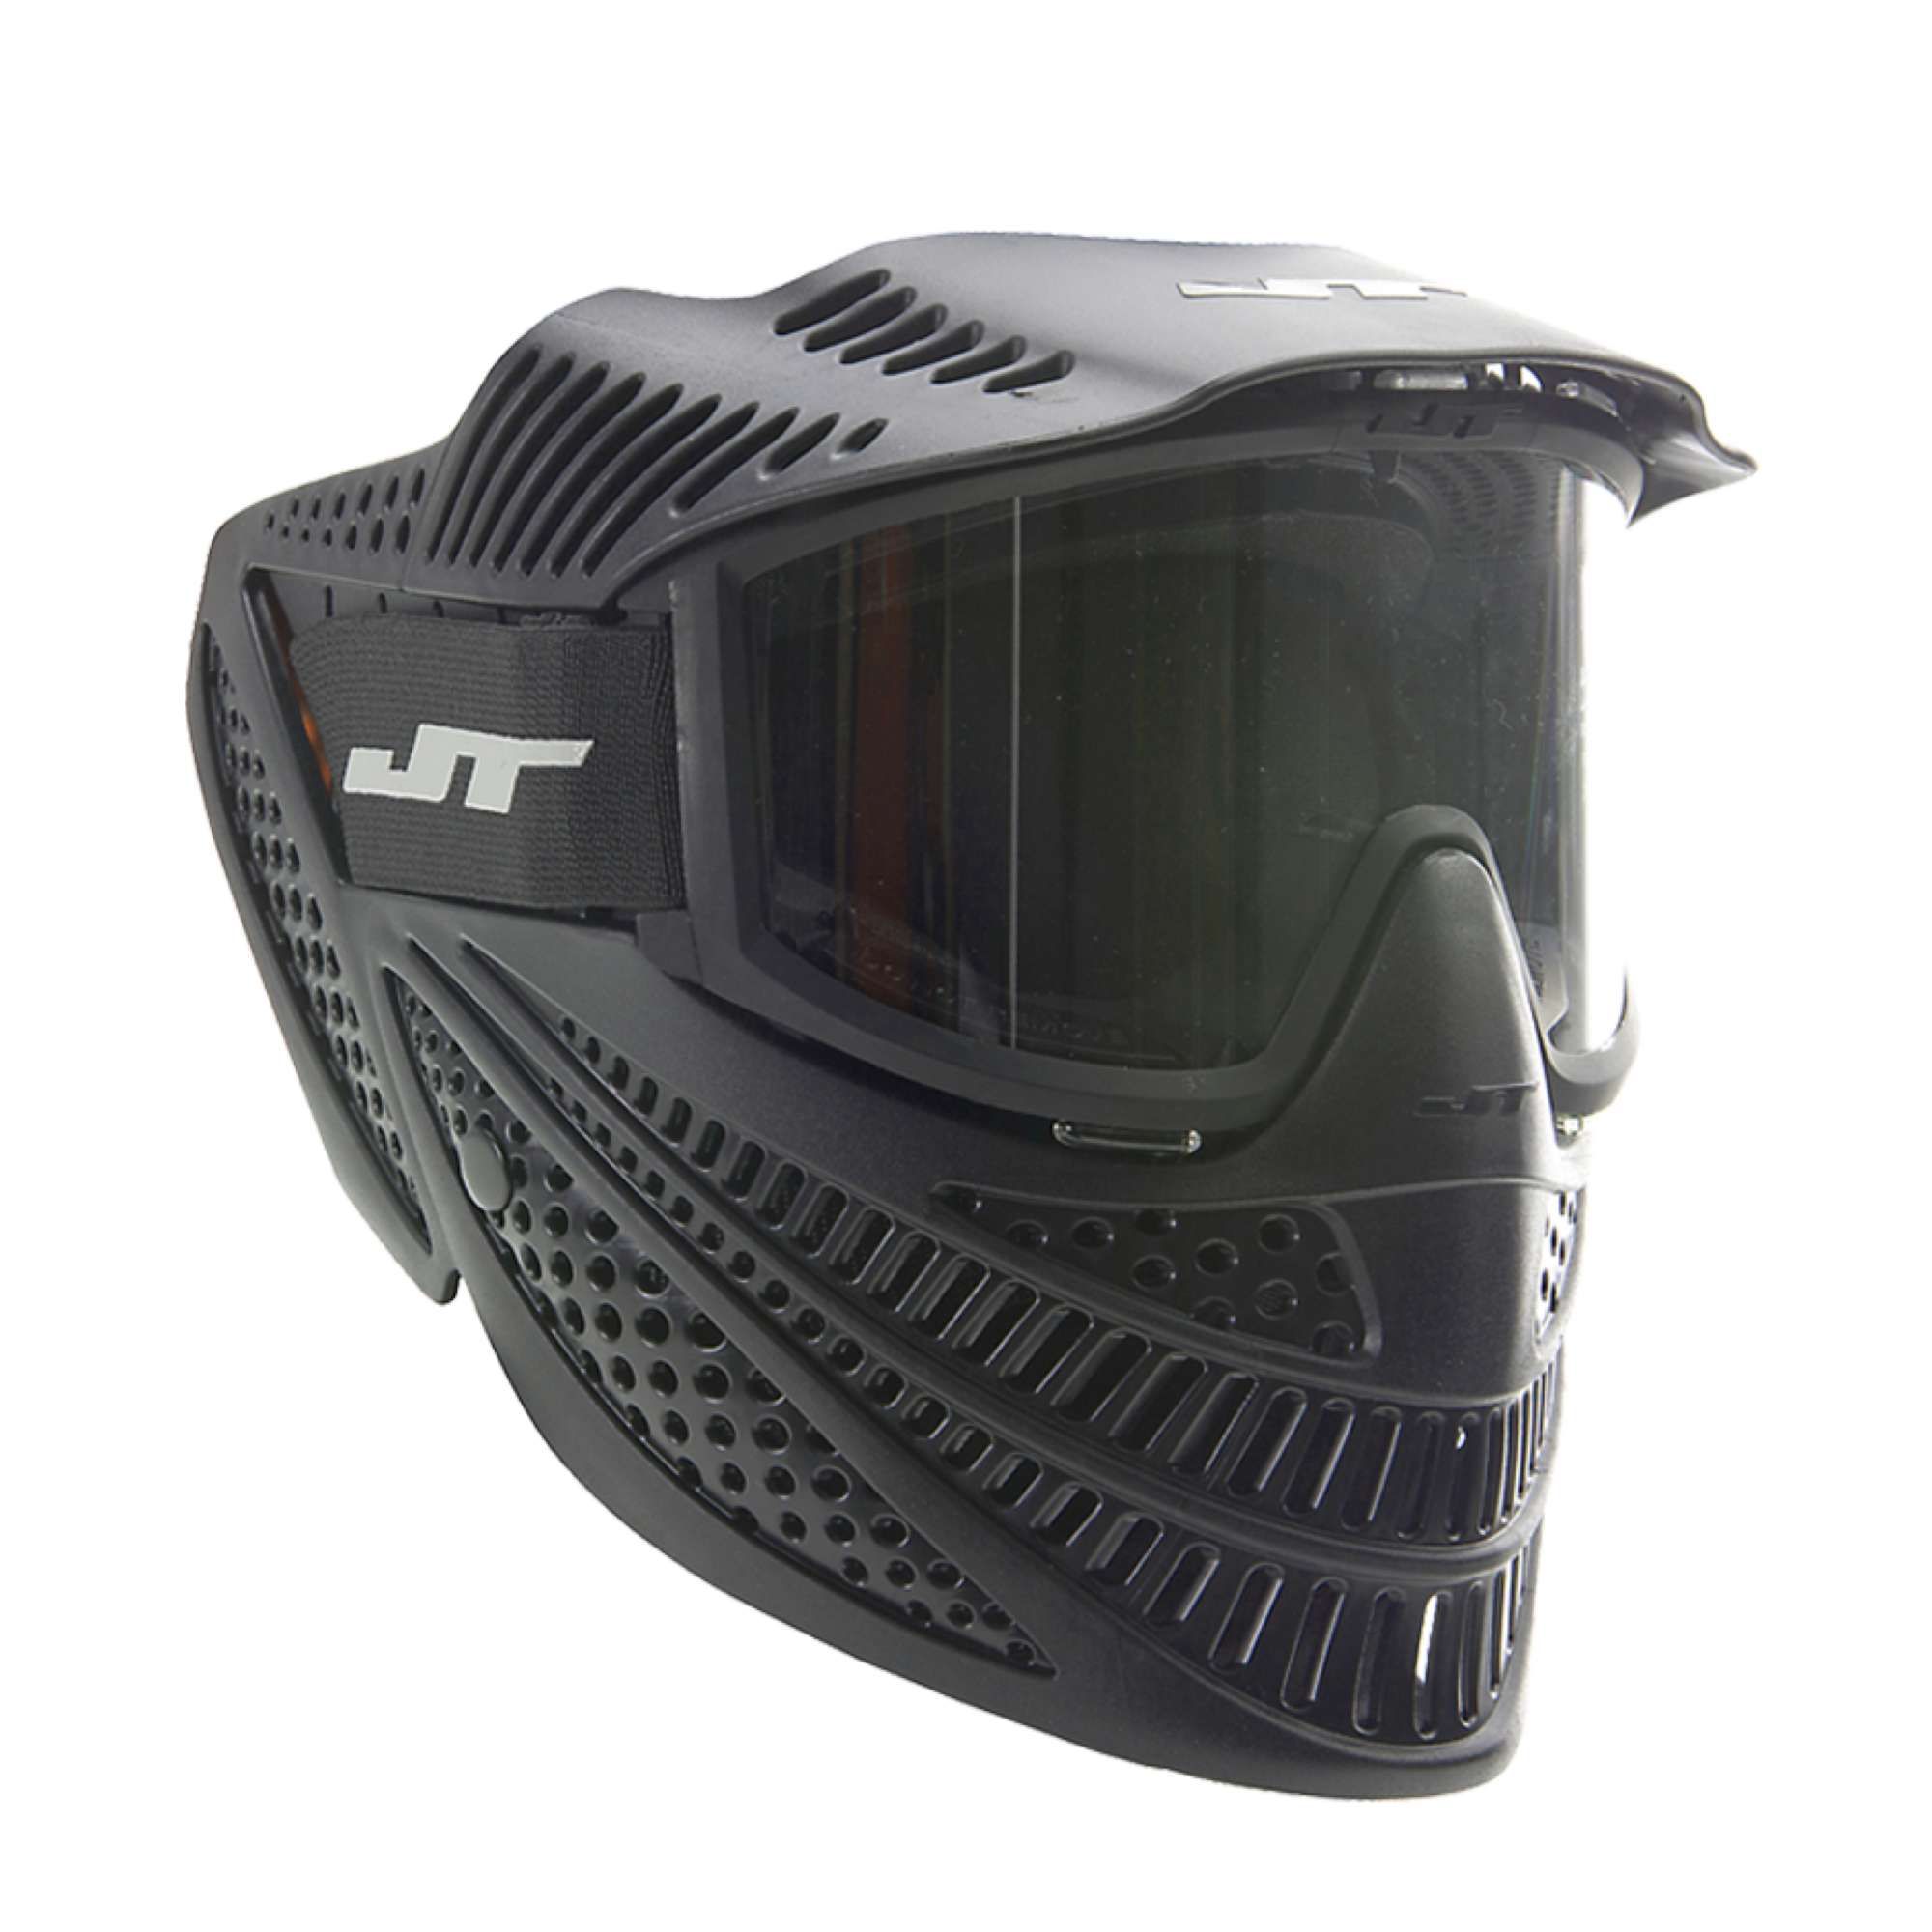 JT Stealth Ready to Play Paintball Marker Gun Kit includes Goggle, Hopper, Squeegee, 90g CO2 and Adapter - image 3 of 8